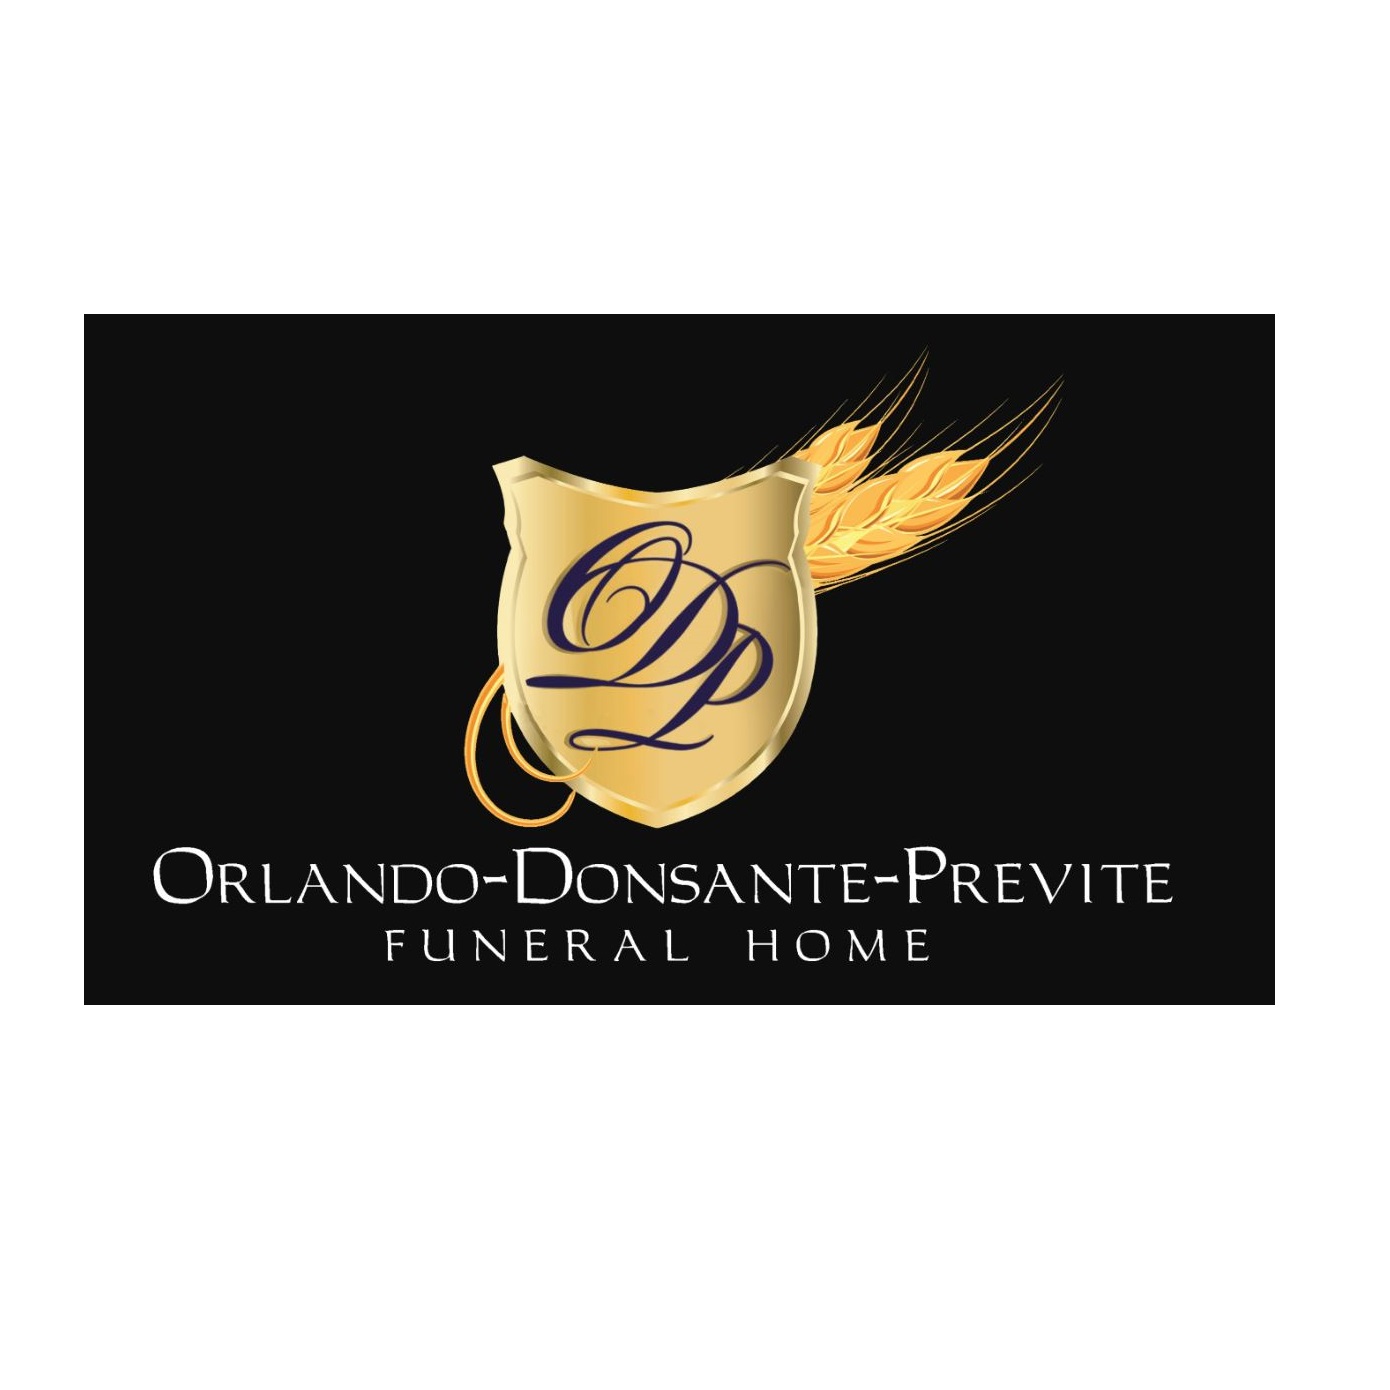 Orlando-Donsante-Previte Funeral Home | 29550 Euclid Ave, Wickliffe, OH 44092, United States | Phone: (440) 943-2466